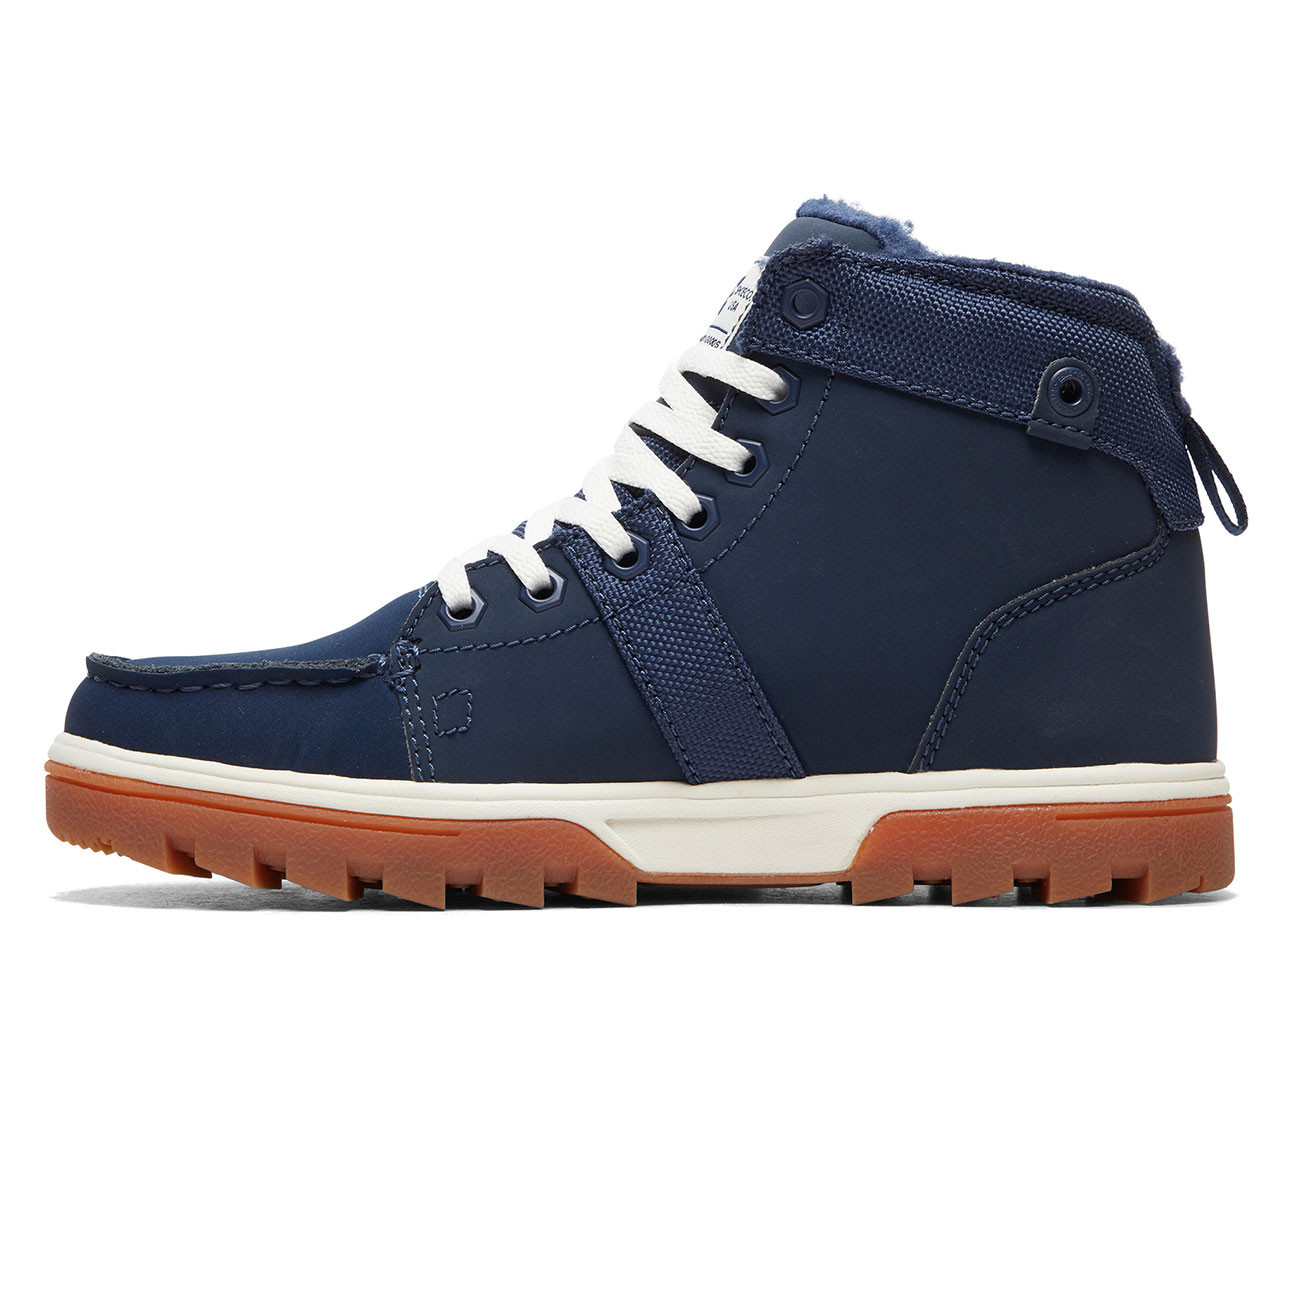 Winter shoes DC Wms Woodland navy/navy 